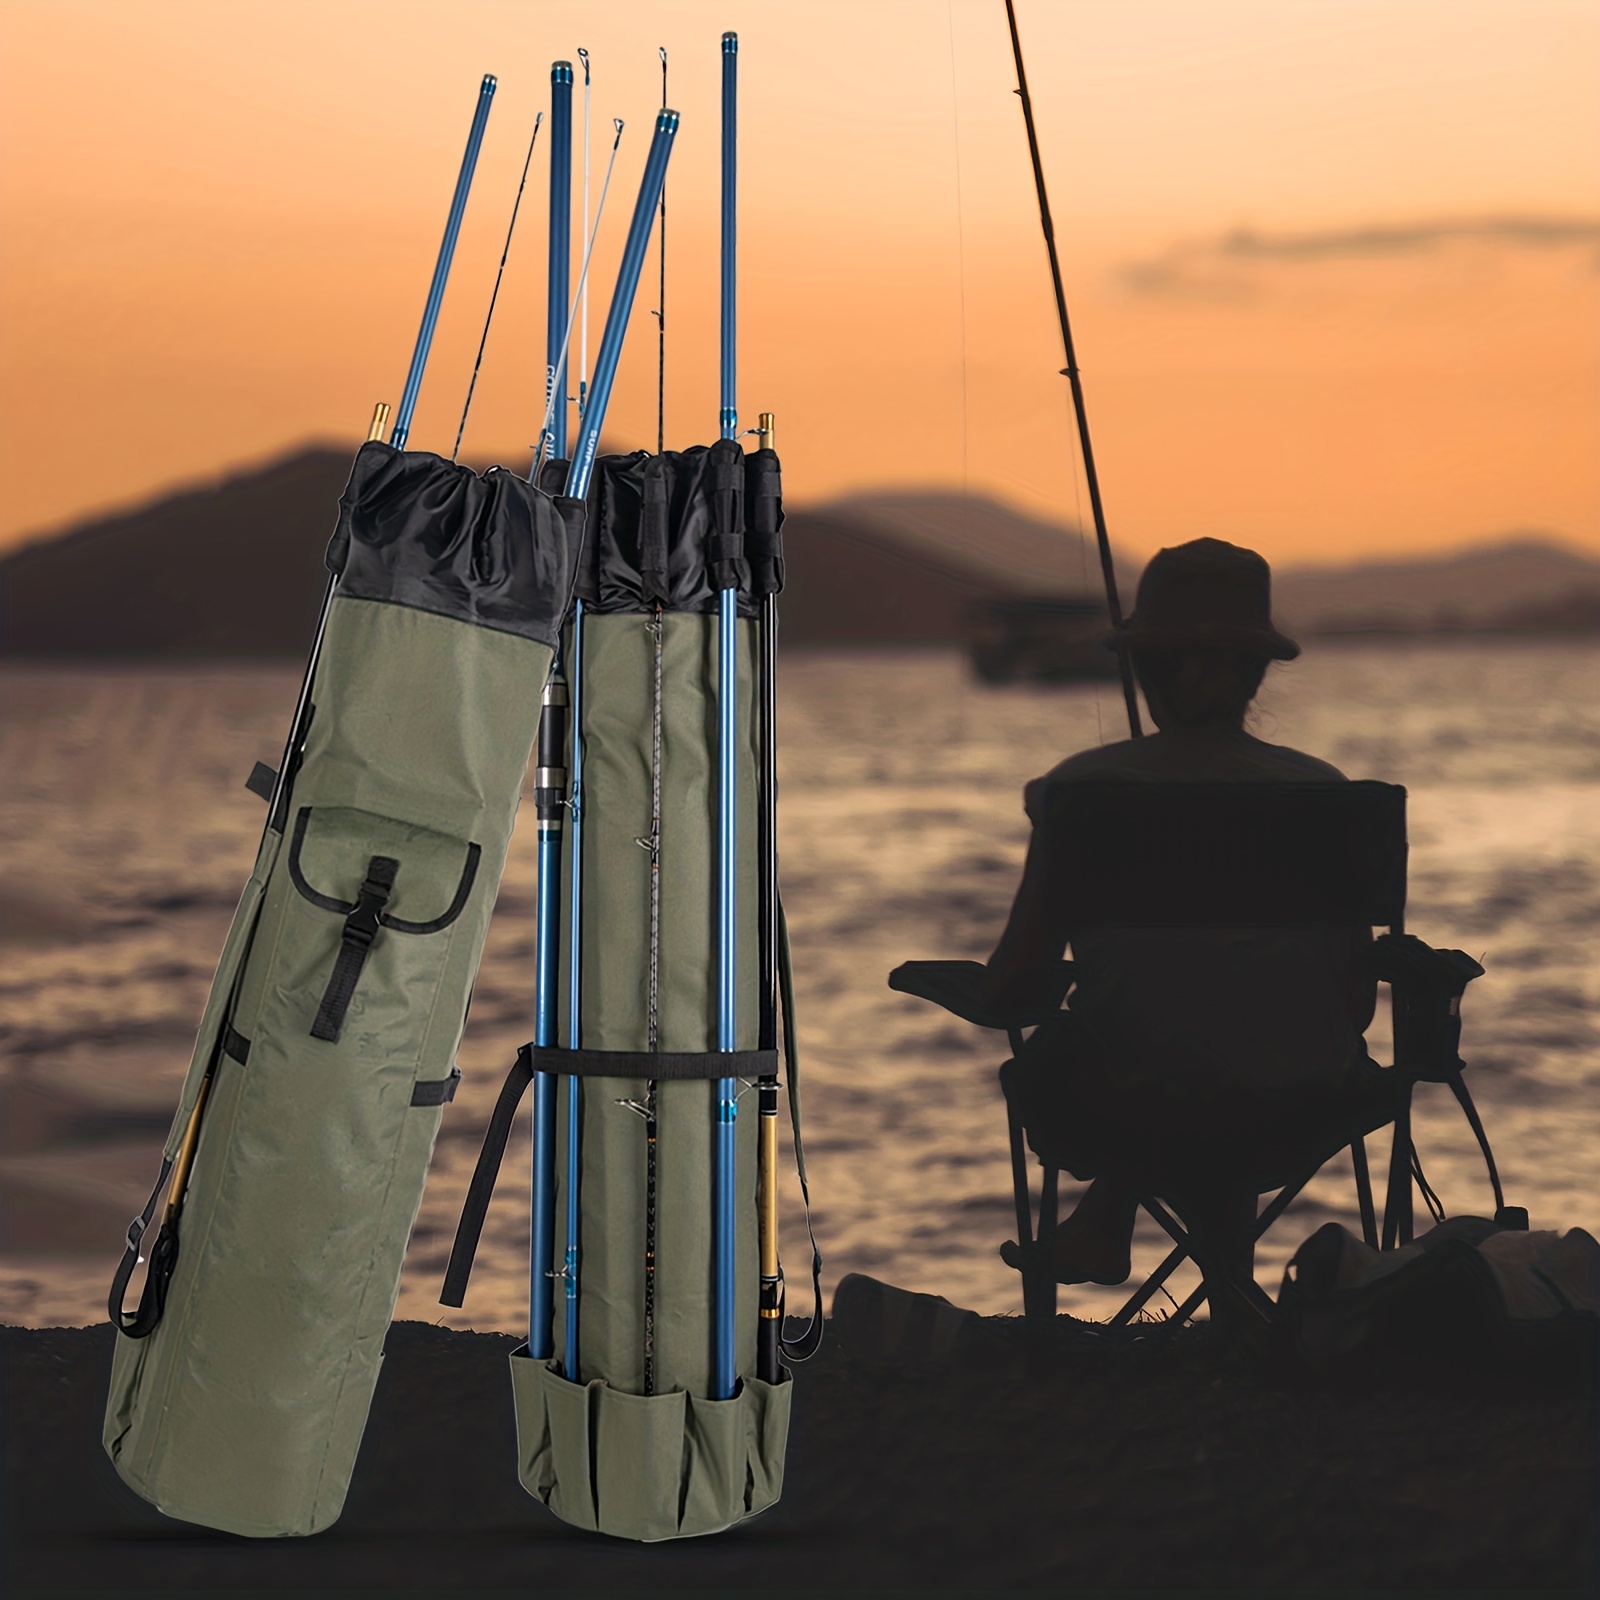 AGOOL Fishing Rod Bag Holder Fishing Rod Carrier Fishing Pole Travel Case Tackle Box Storage Multifunctional Stand Bags Large Capacity Lightweight